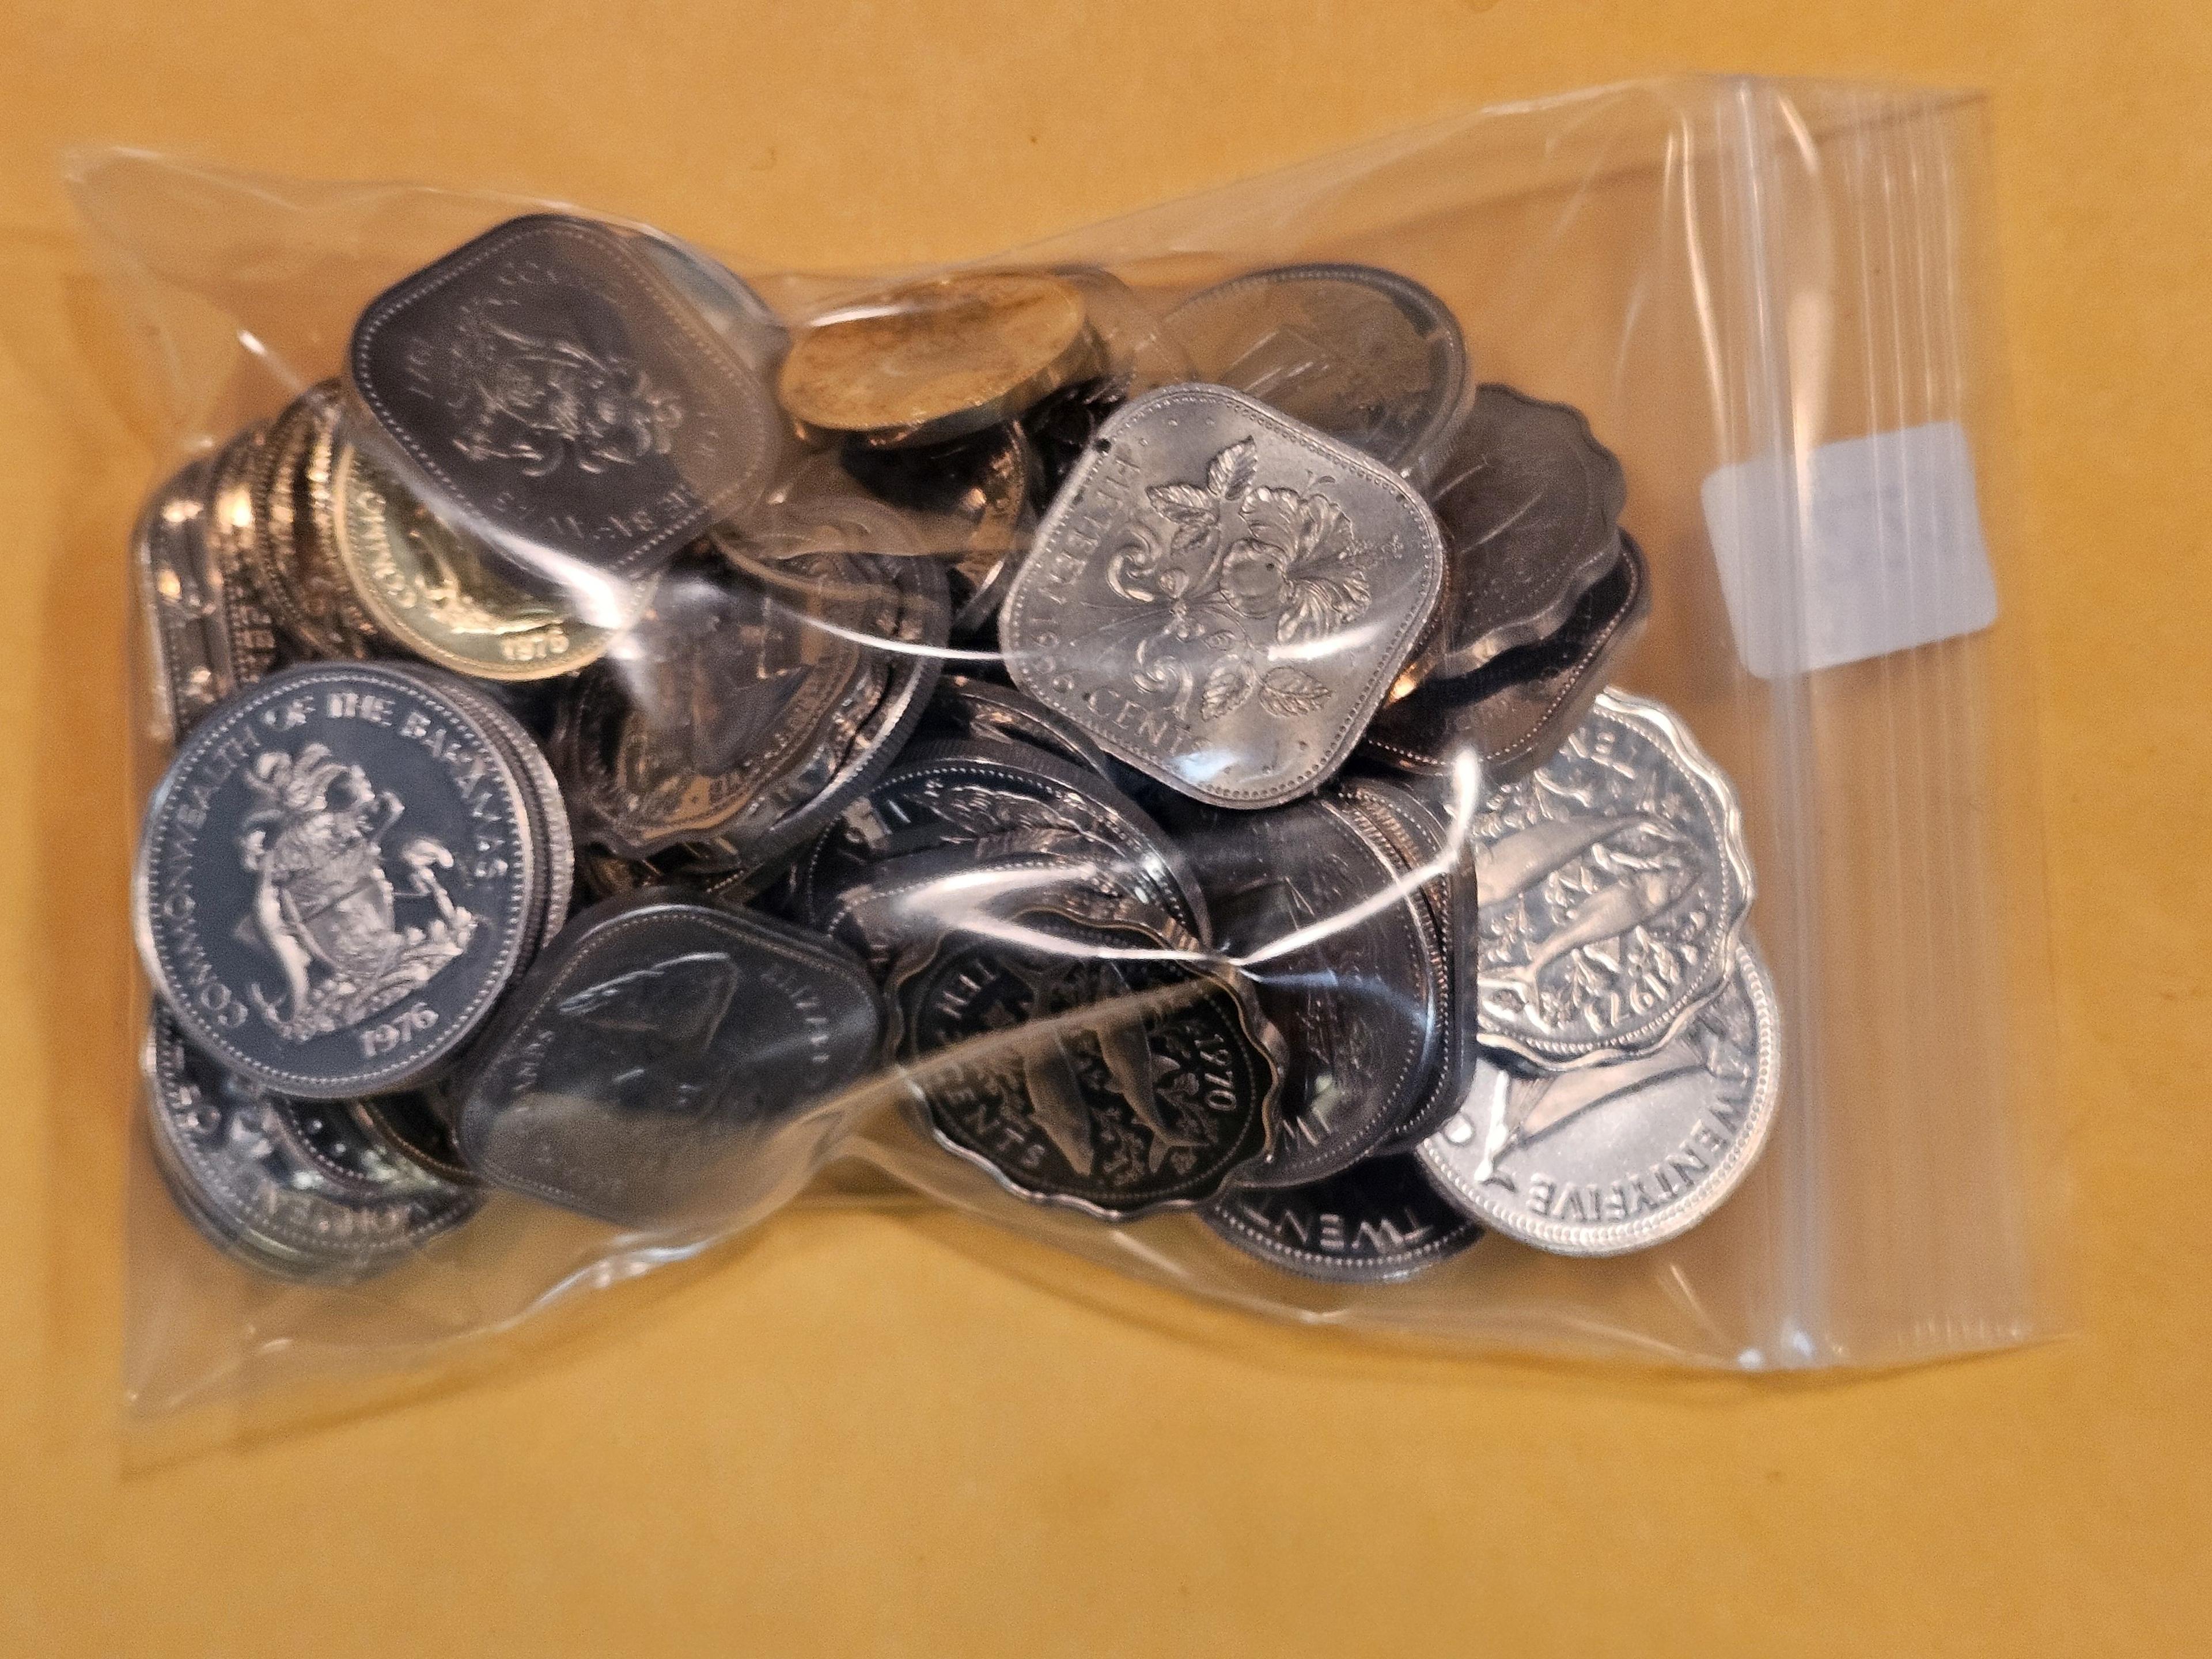 TEN ounces of Proof coins from the Bahamas